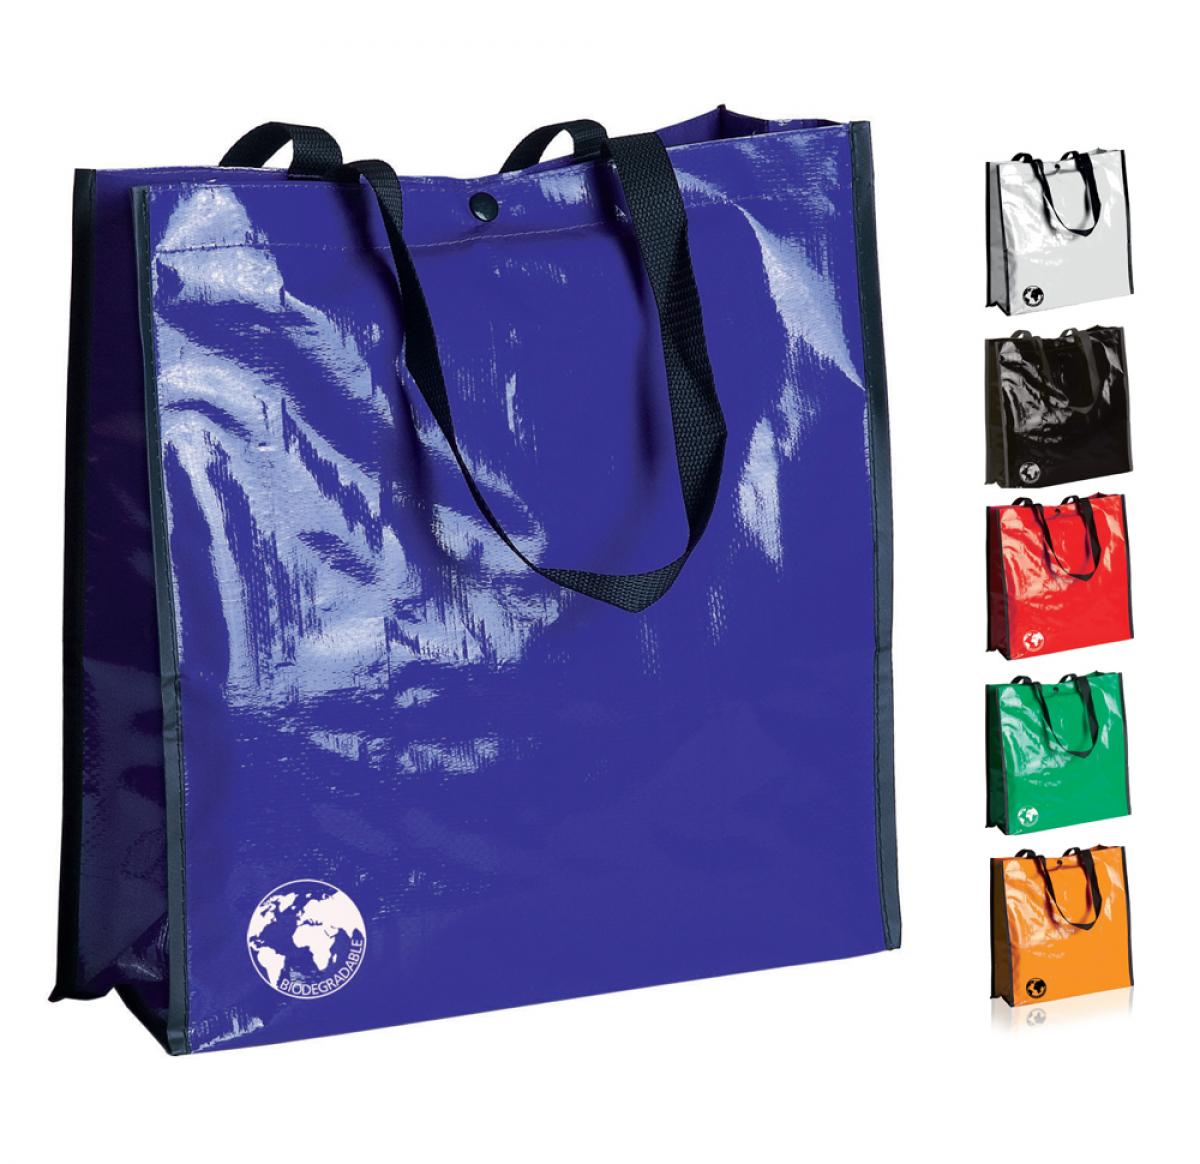 Printed Large Recycled Laminated Bags For Life Shopper